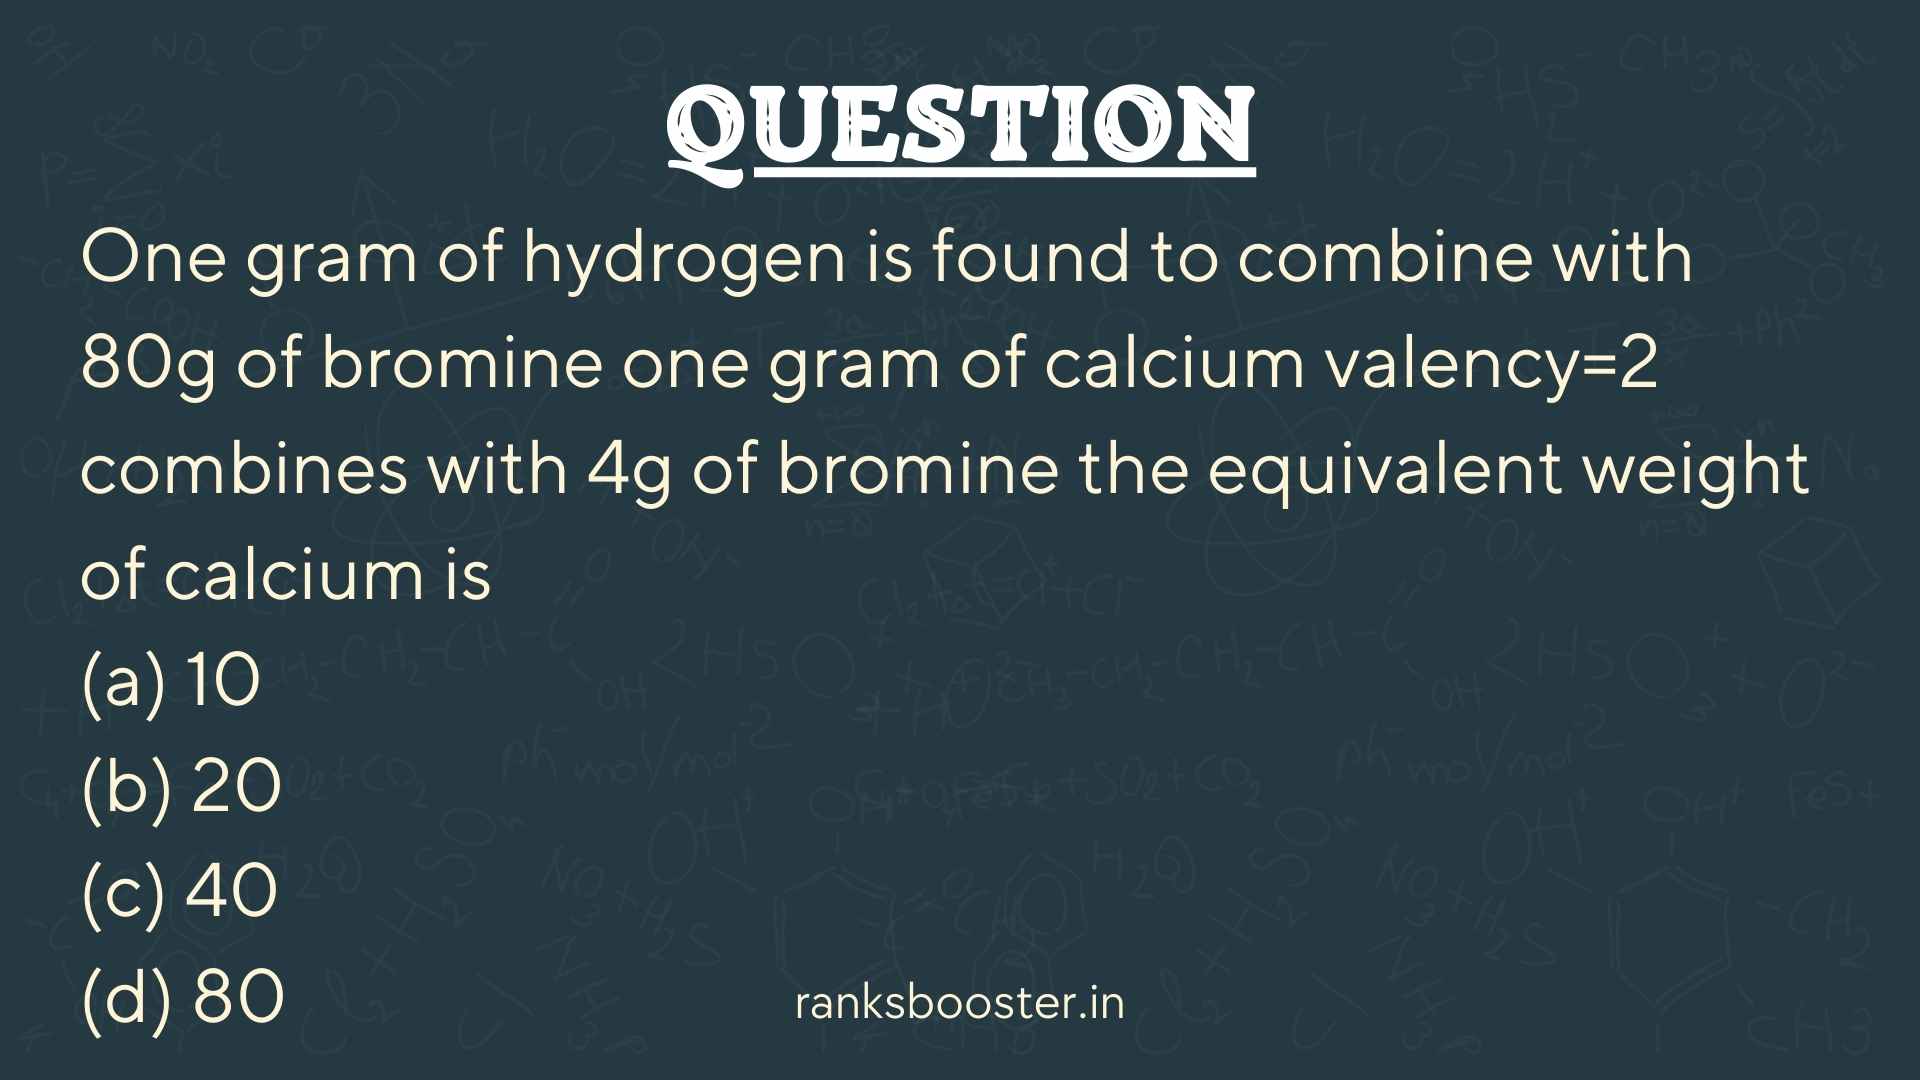 One gram of hydrogen is found to combine with 80g of bromine one gram of calcium valency=2 combines with 4g of bromine the equivalent weight of calcium is (a) 10 (b) 20 (c) 40 (d) 80